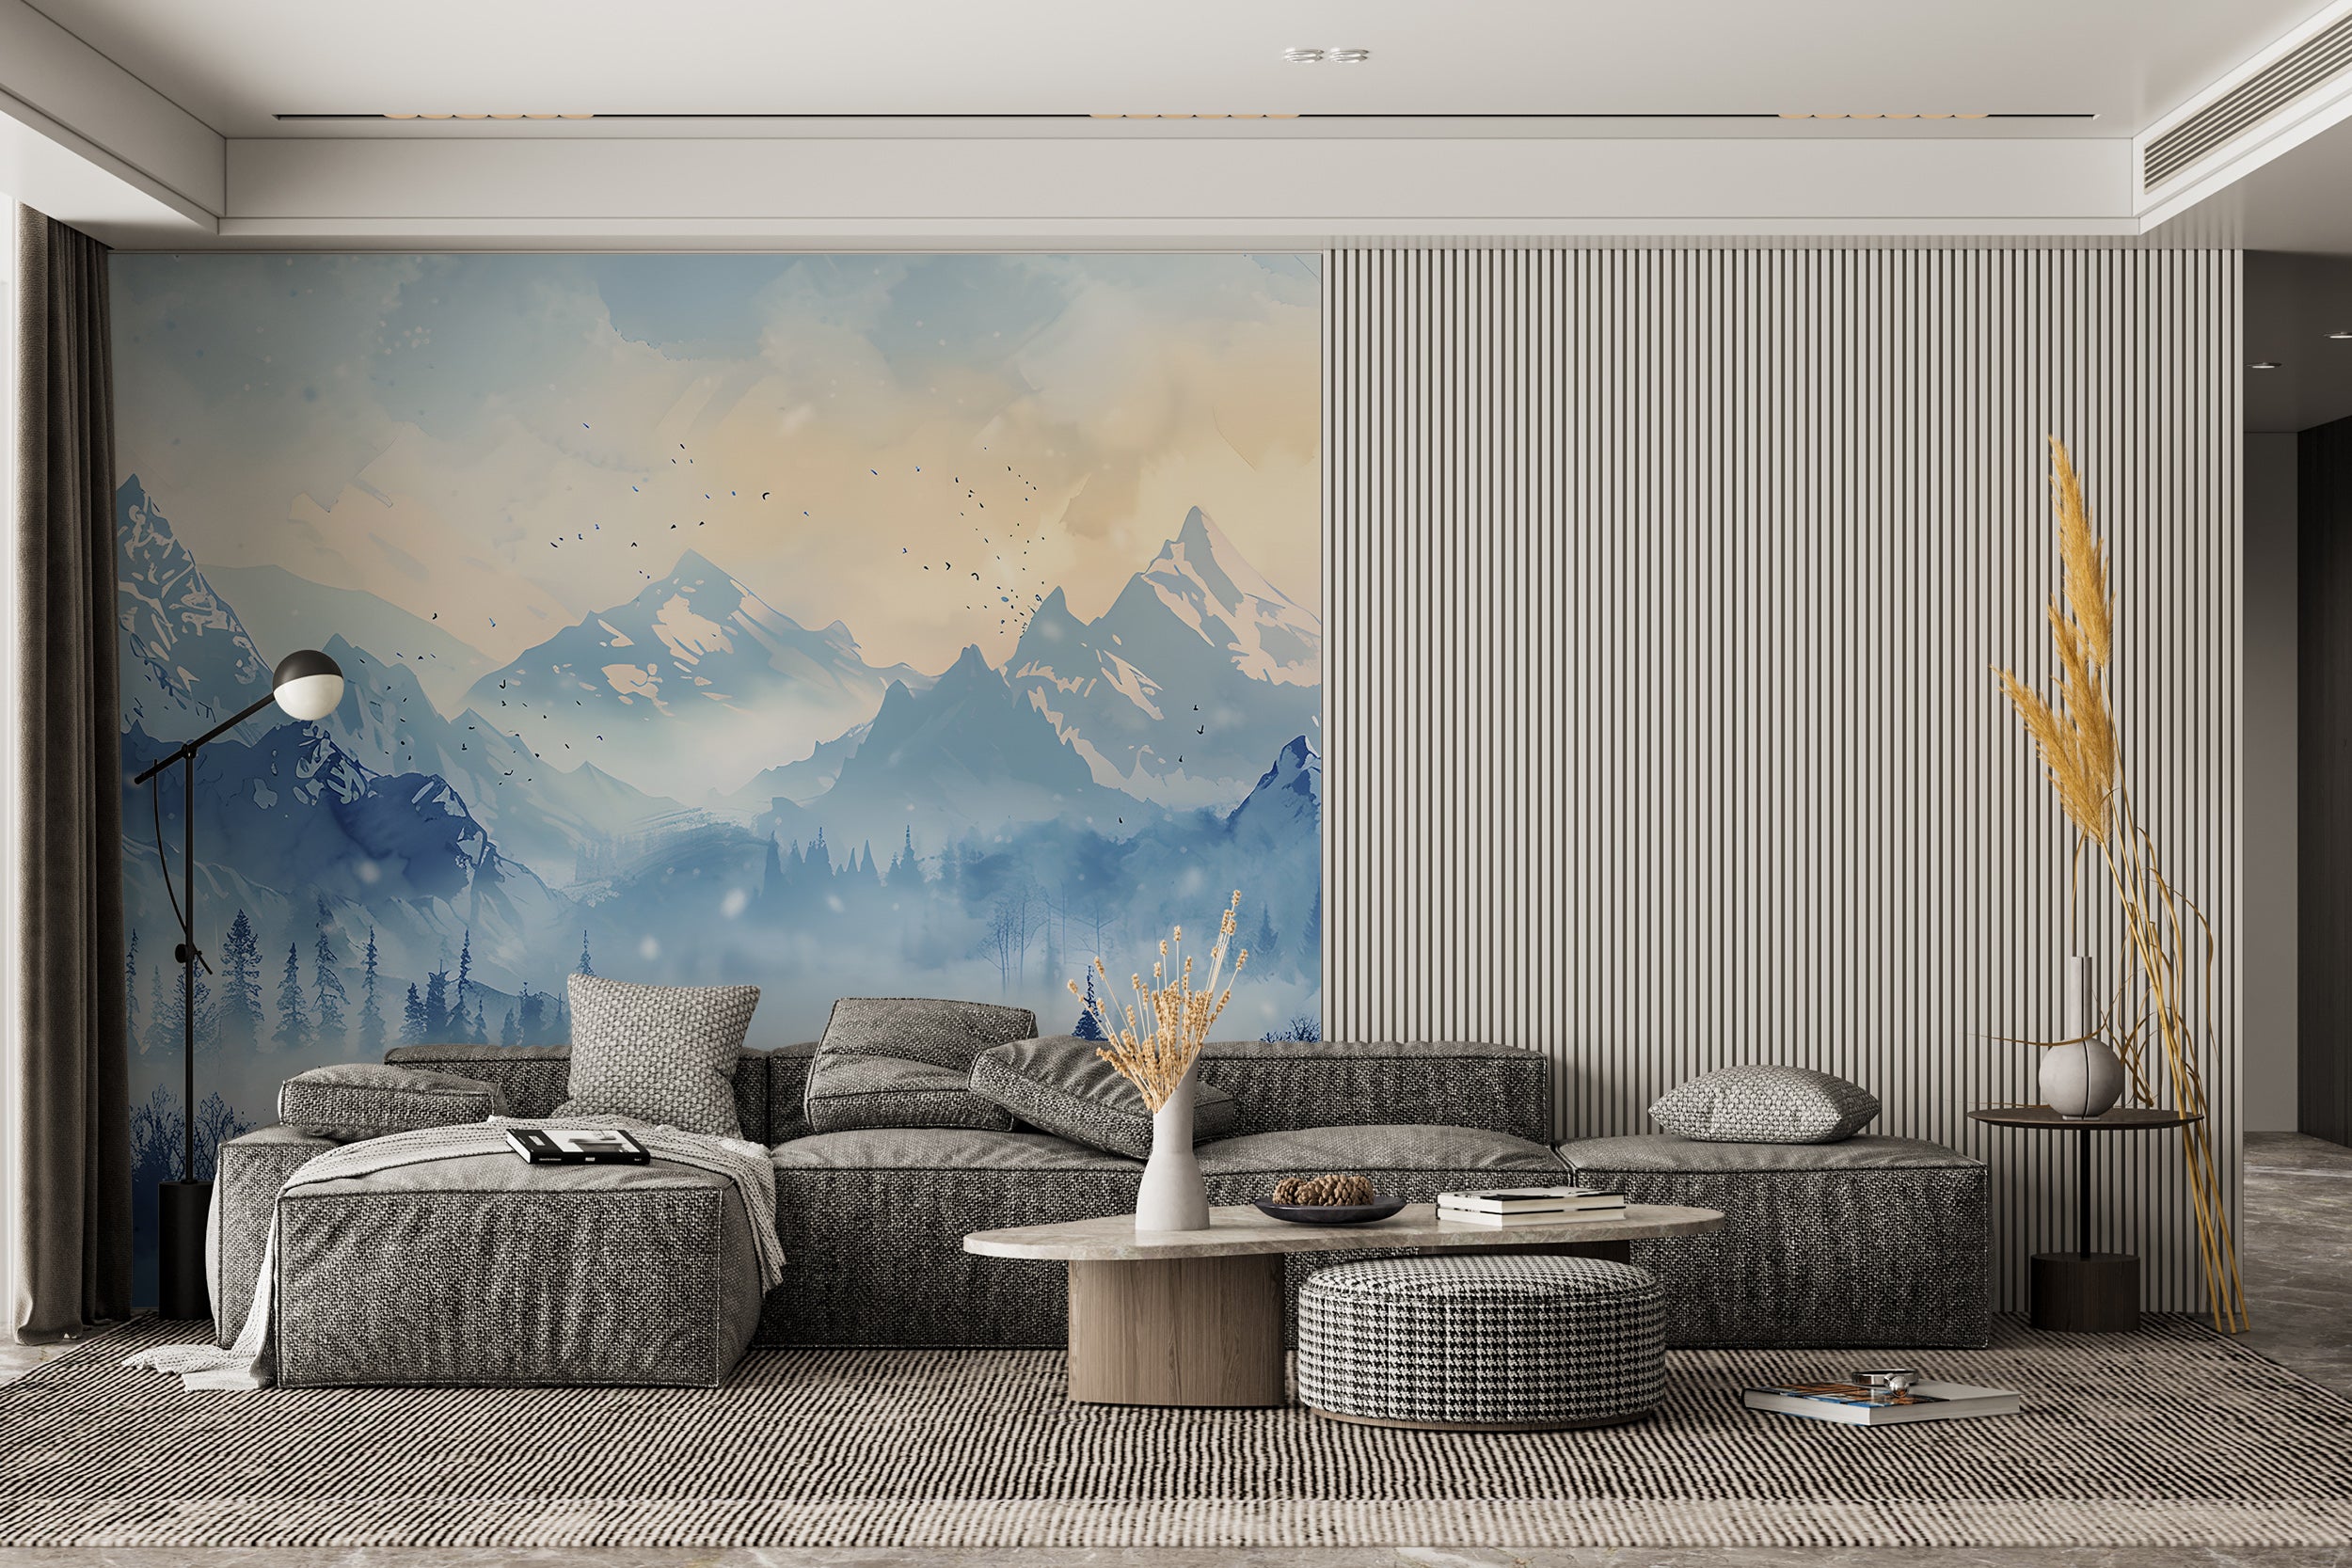 Winter Mountains Mural, Watercolor Blue Mountain and Forest Landscape, Peel and Stick Foggy Nature Wallpaper, Nursery Removable Misty Decal